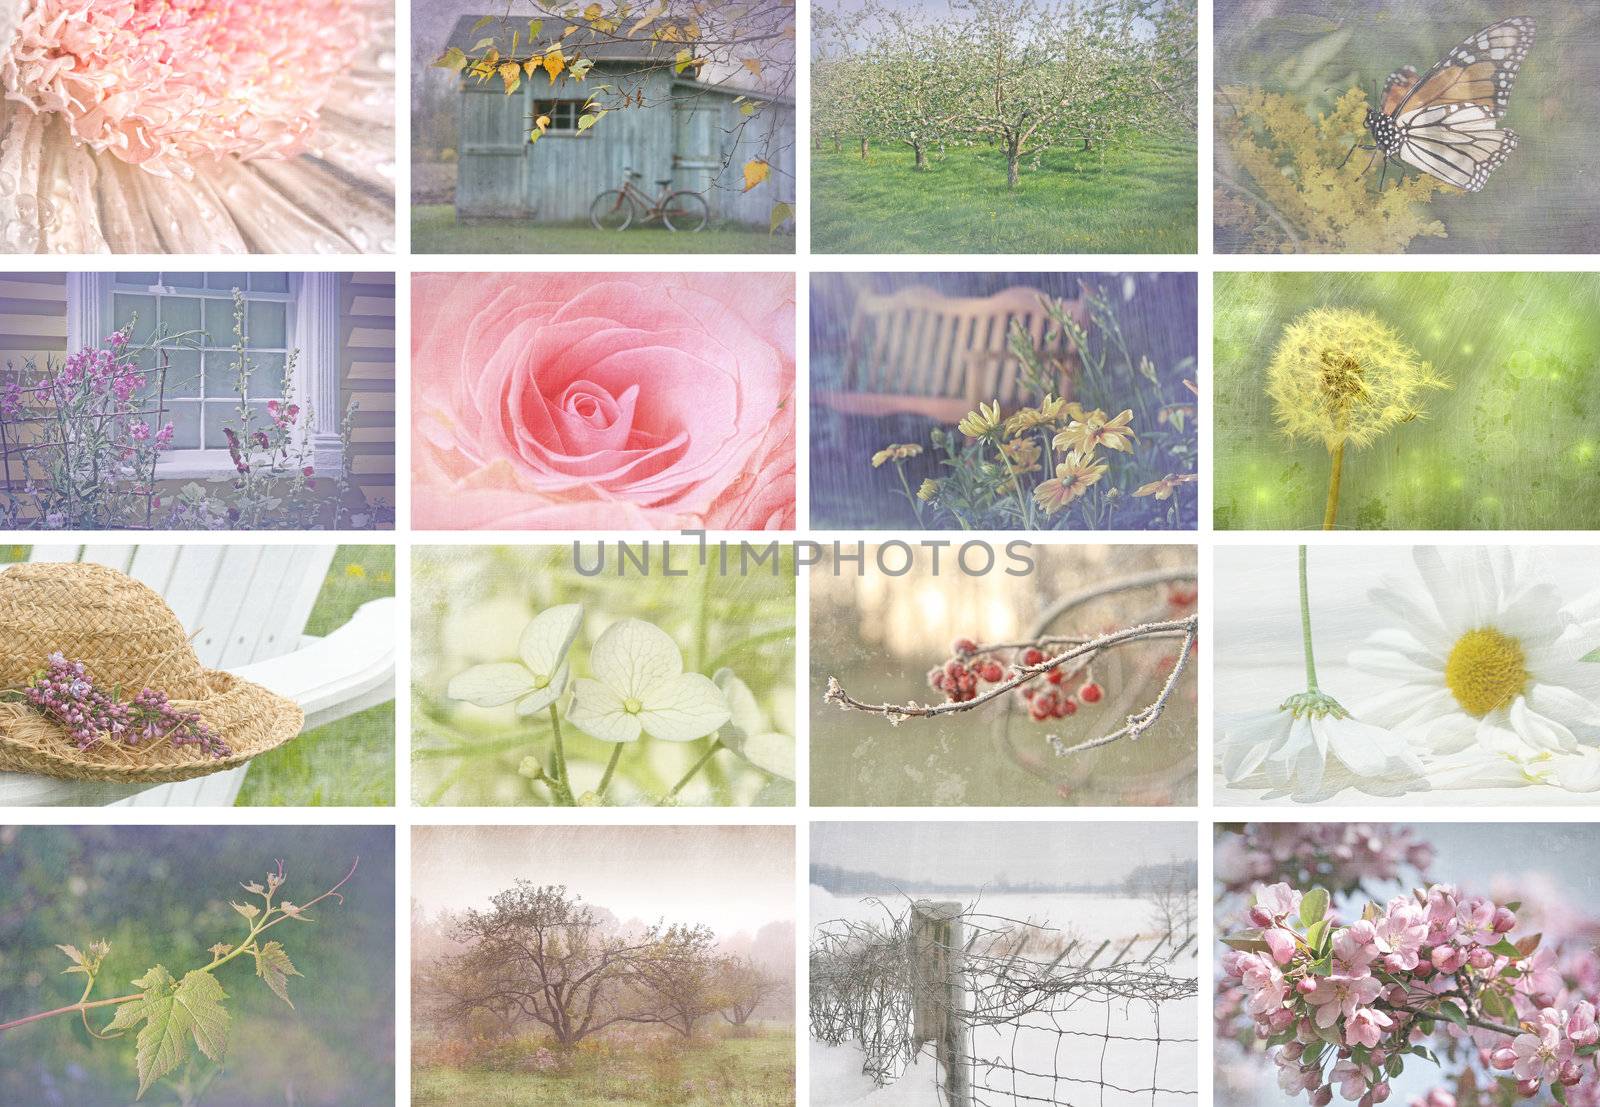 Collage of seasonal images with vintage look by Sandralise